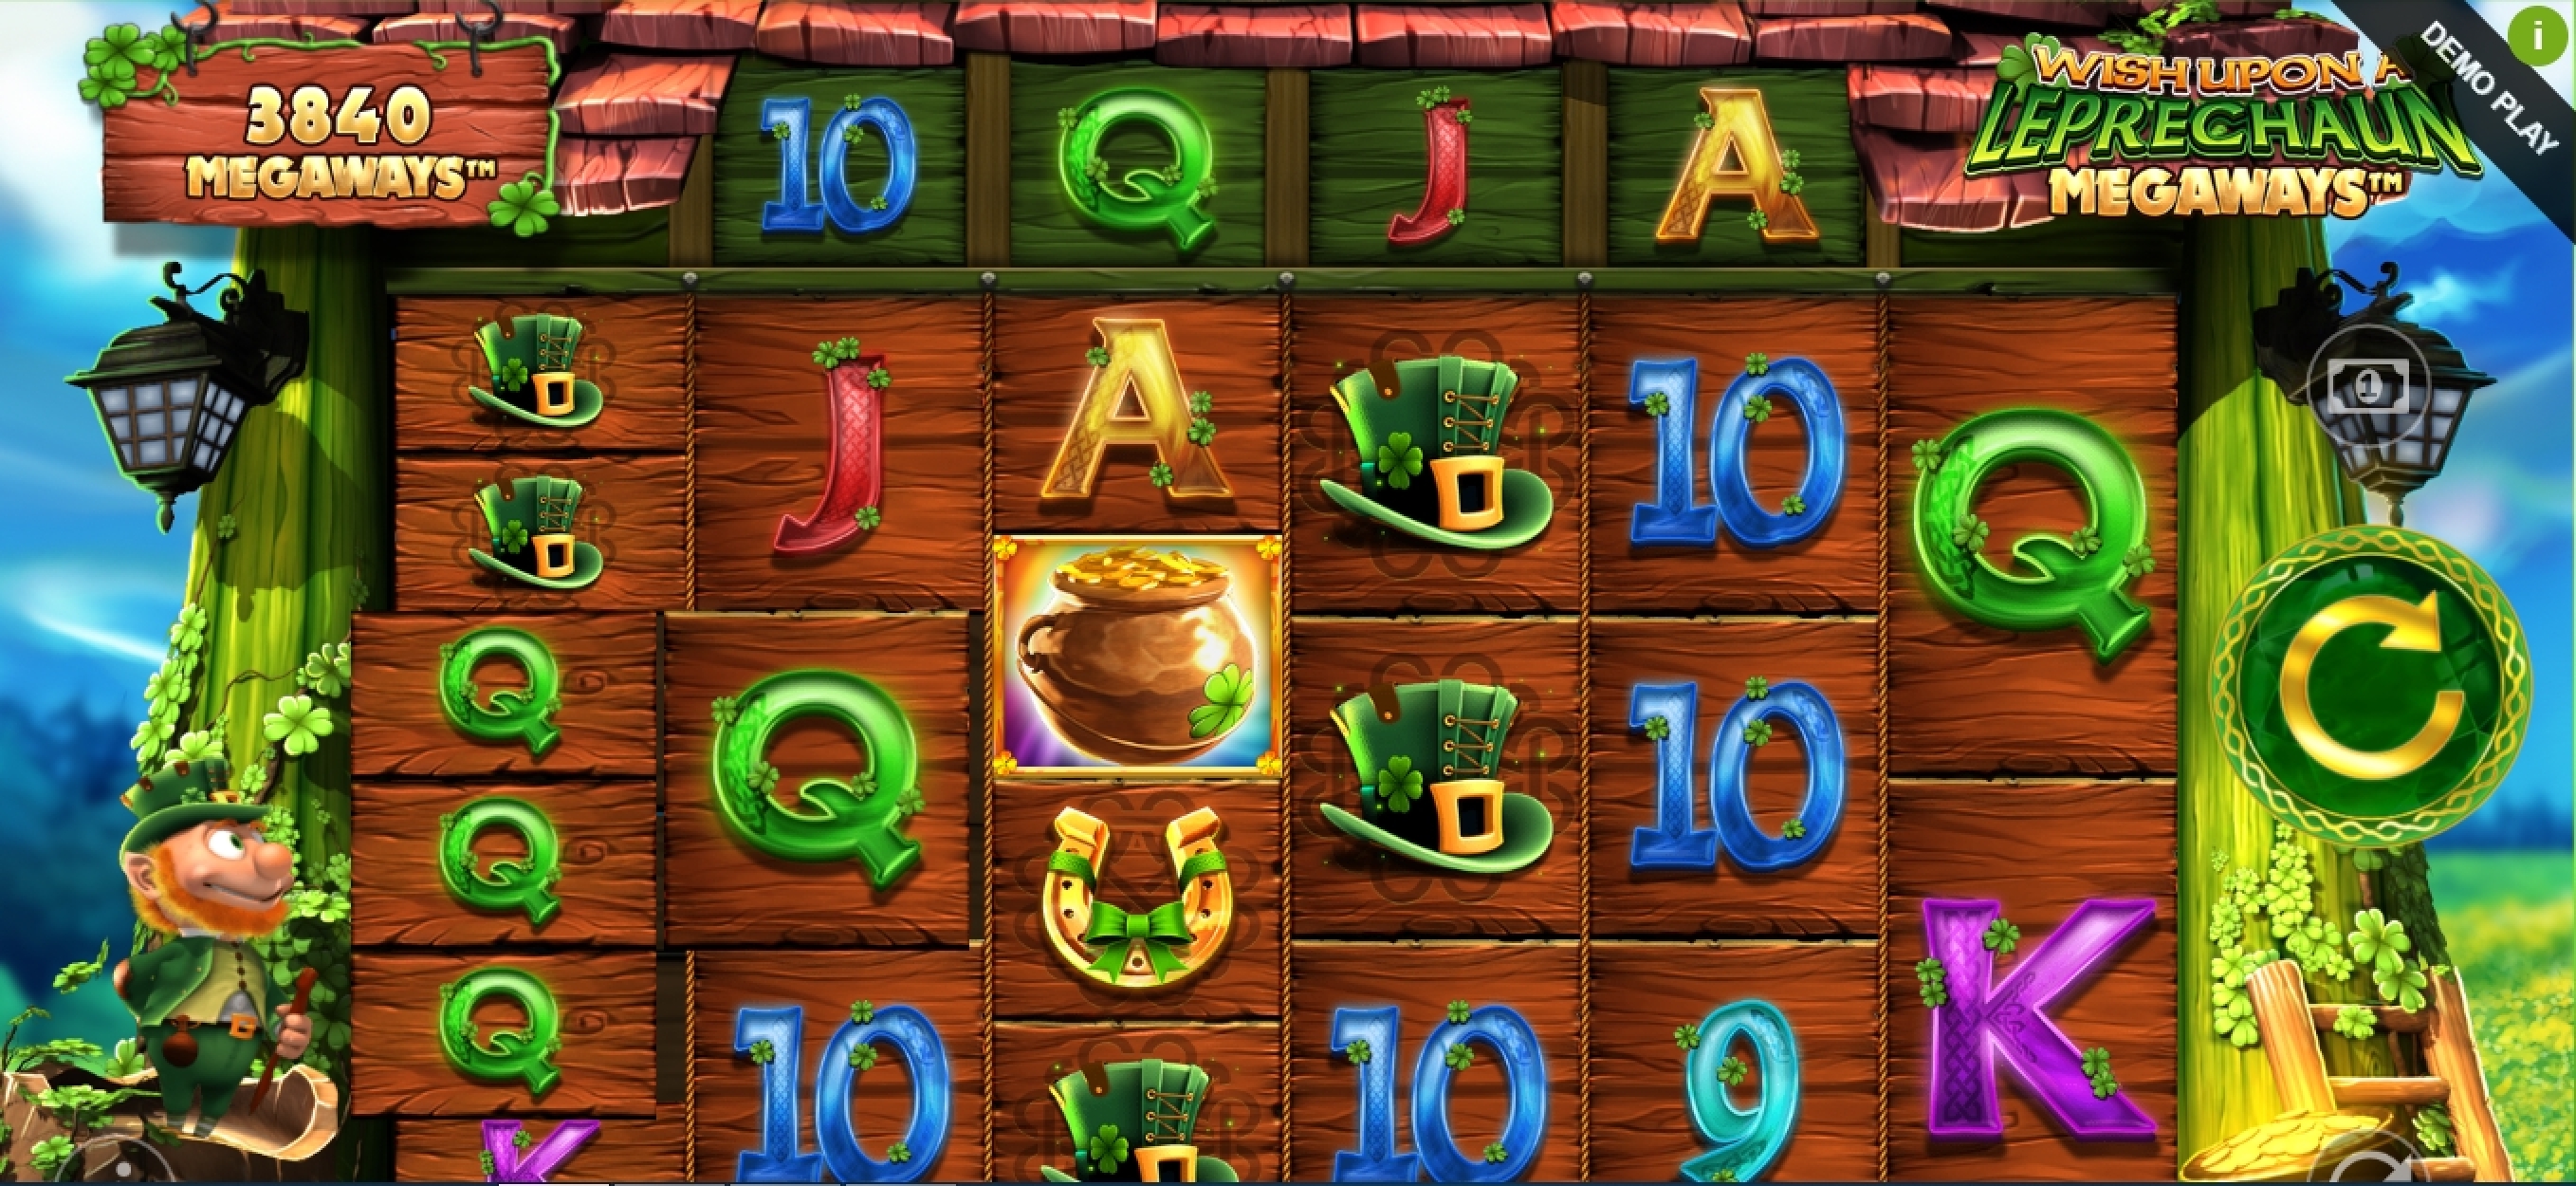 Win Money in Wish Upon A Leprechaun Megaways Free Slot Game by Blueprint Gaming